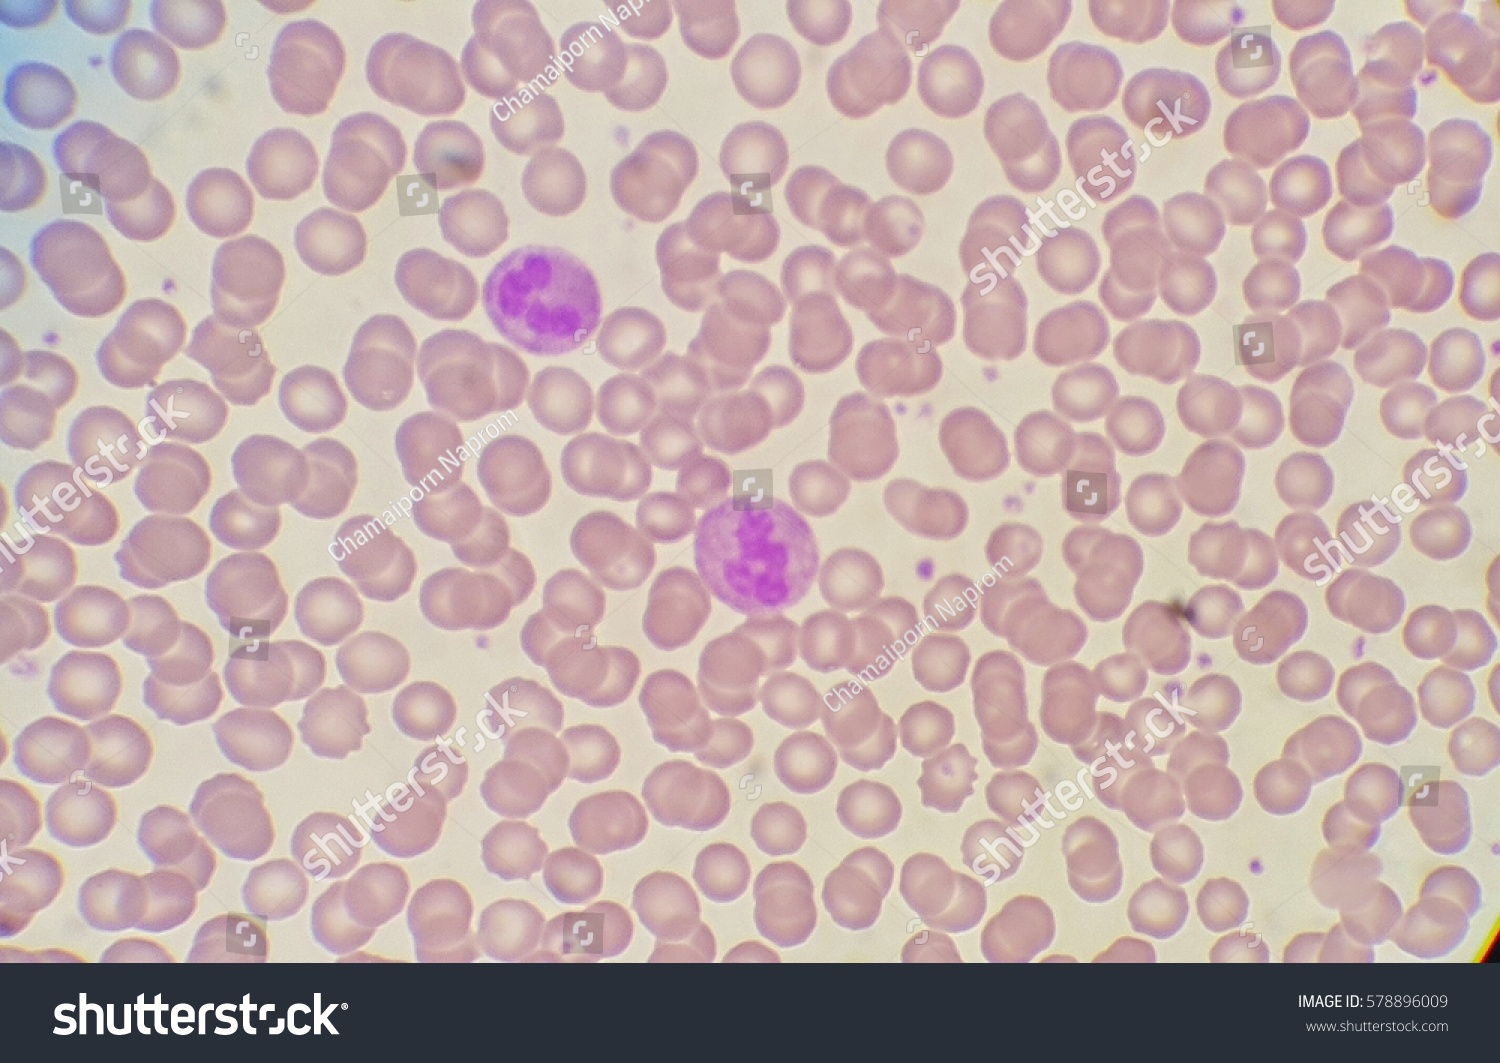 White blood cells under microscope